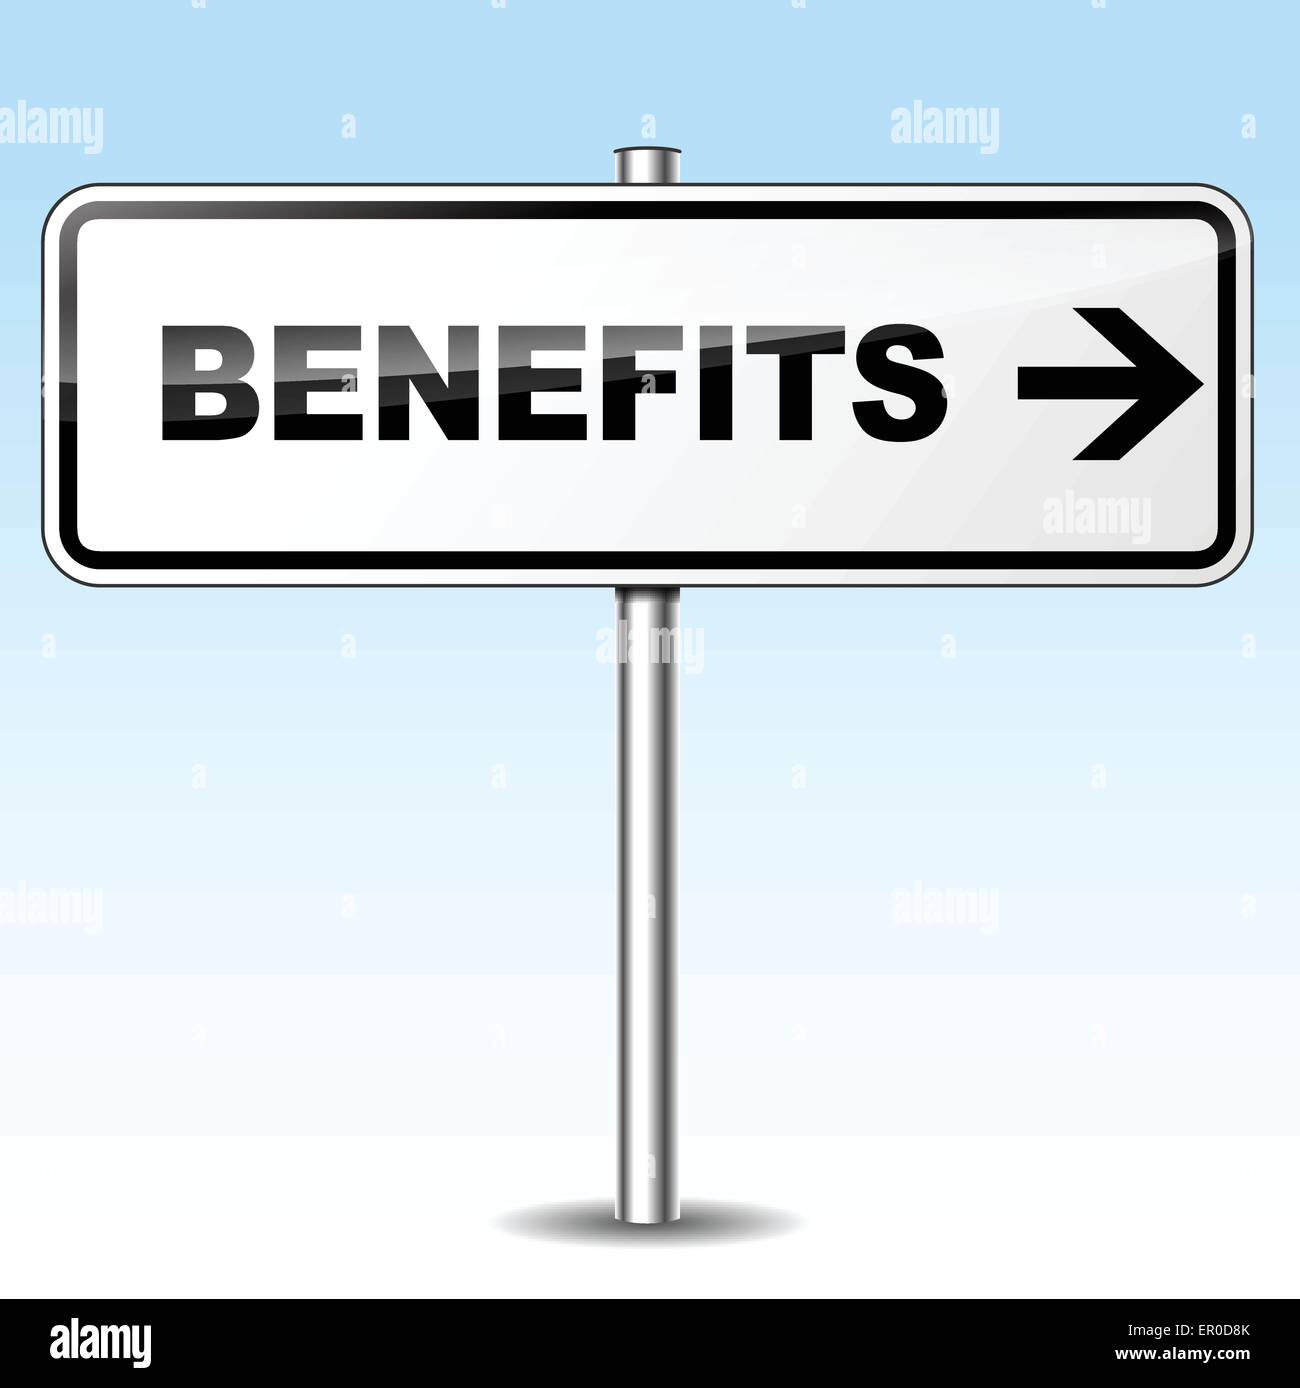 Illustration of benefits sign on sky background Stock Vector